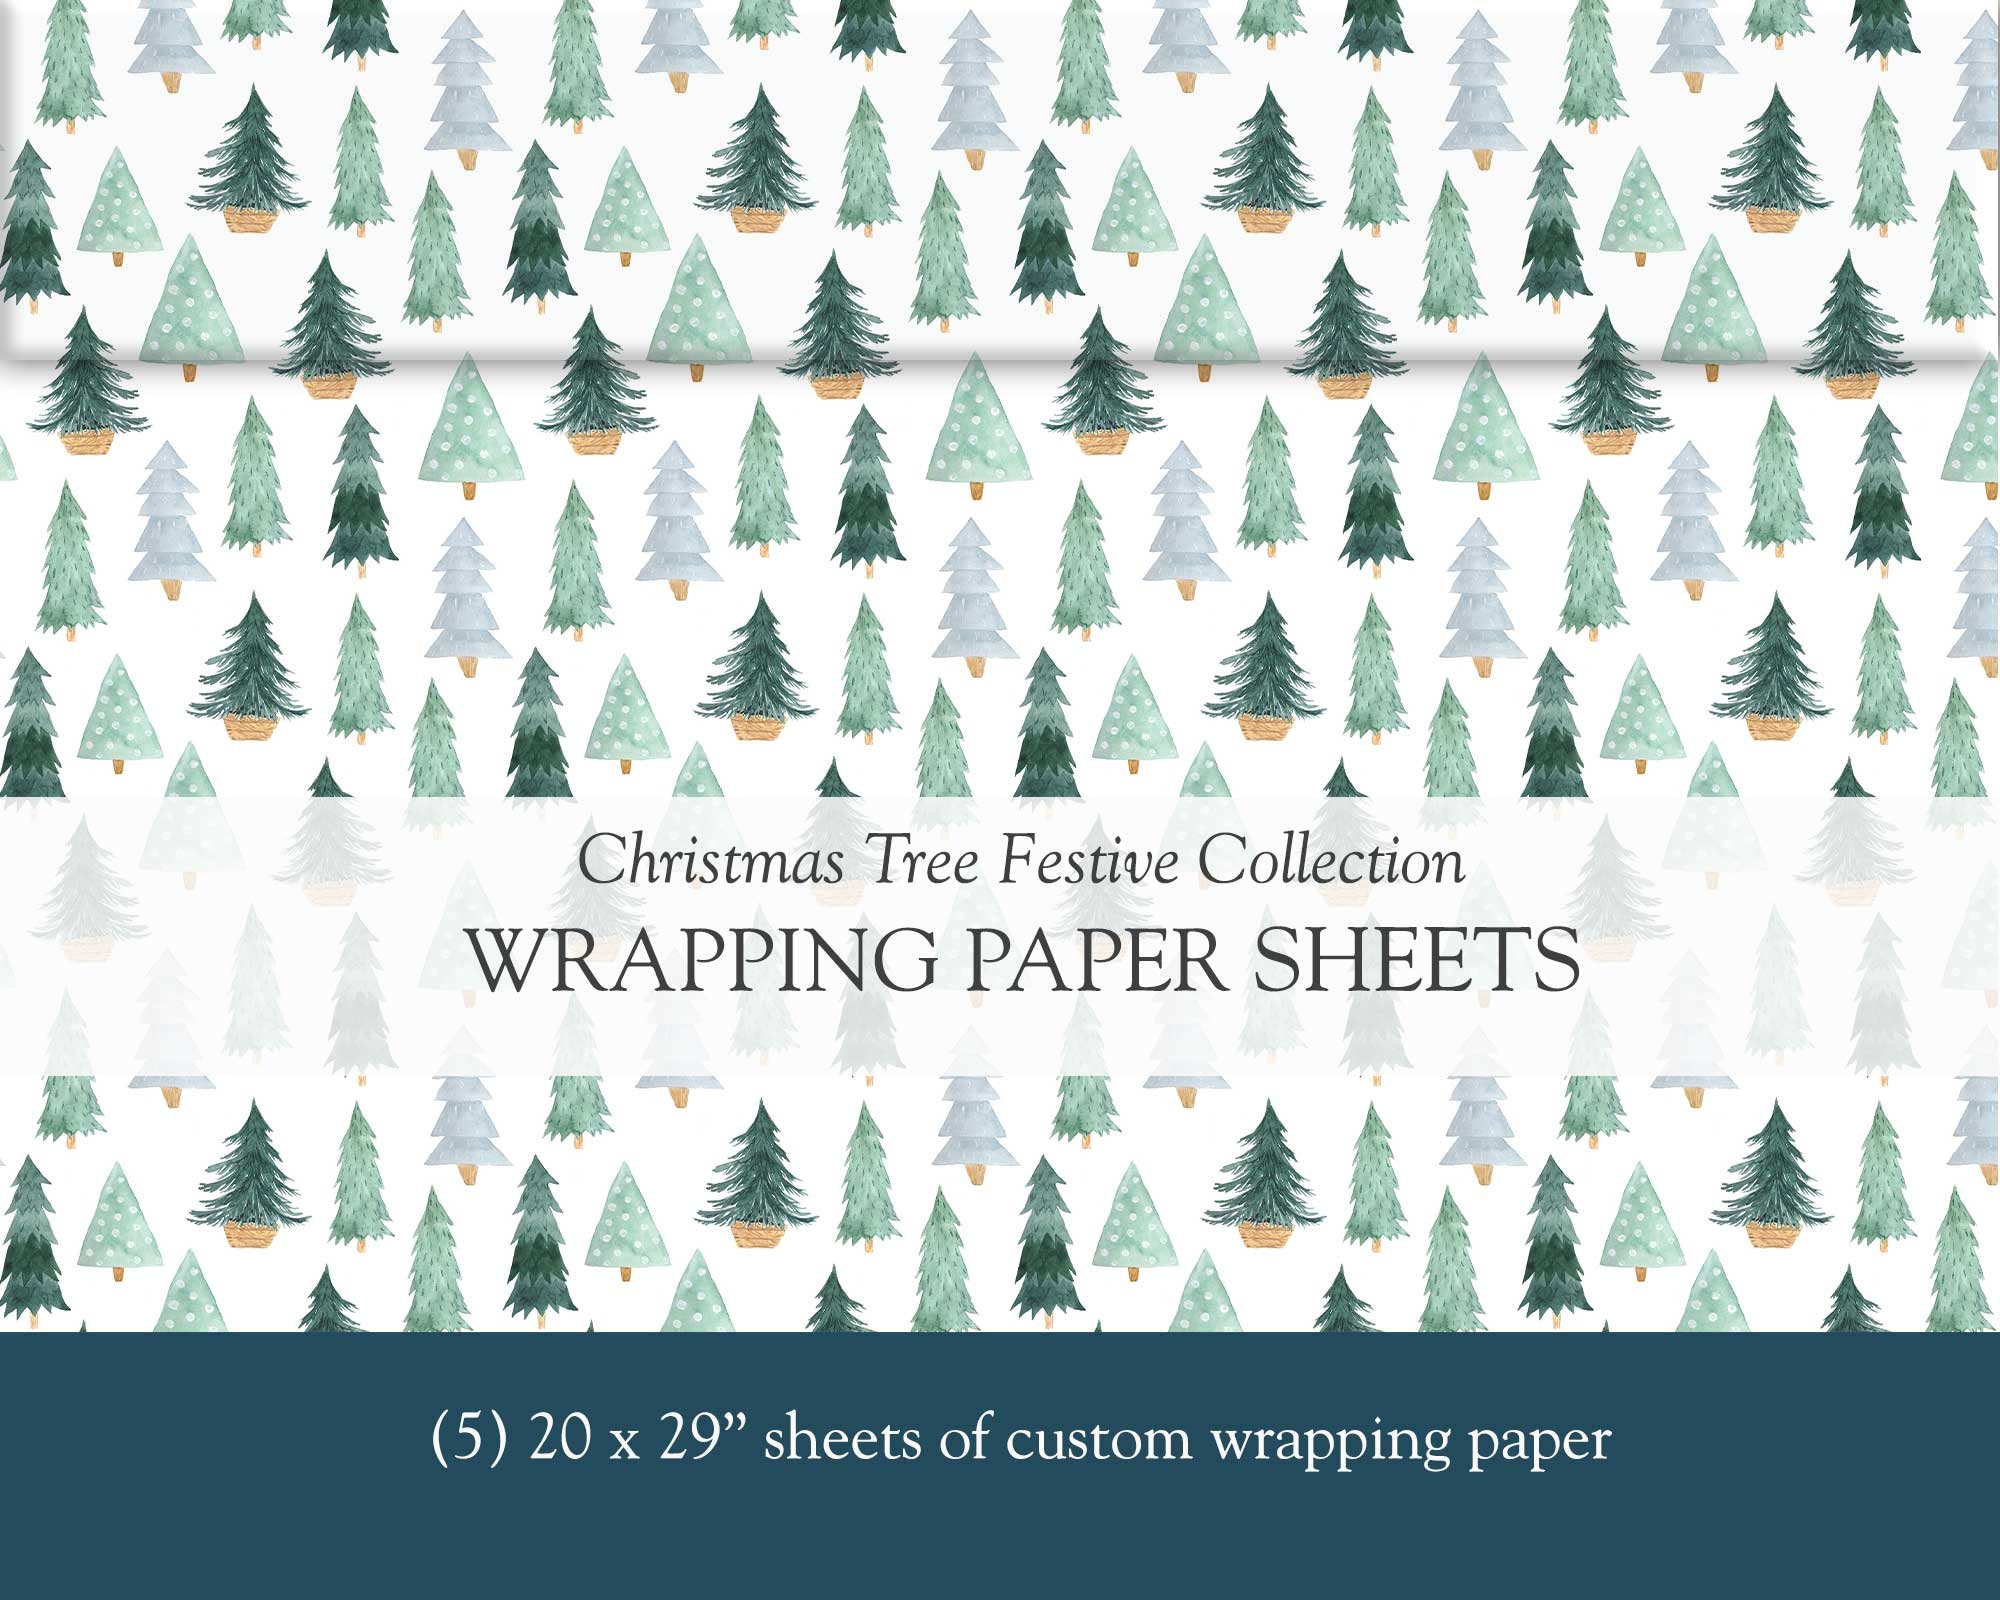 Holiday Gift Wrap Christmas Wrapping Paper, Christmas Wrap, Holiday Paper,  Gift Wrapping, Christmas Gift Wrap, Christmas Gift Wrap Paper 